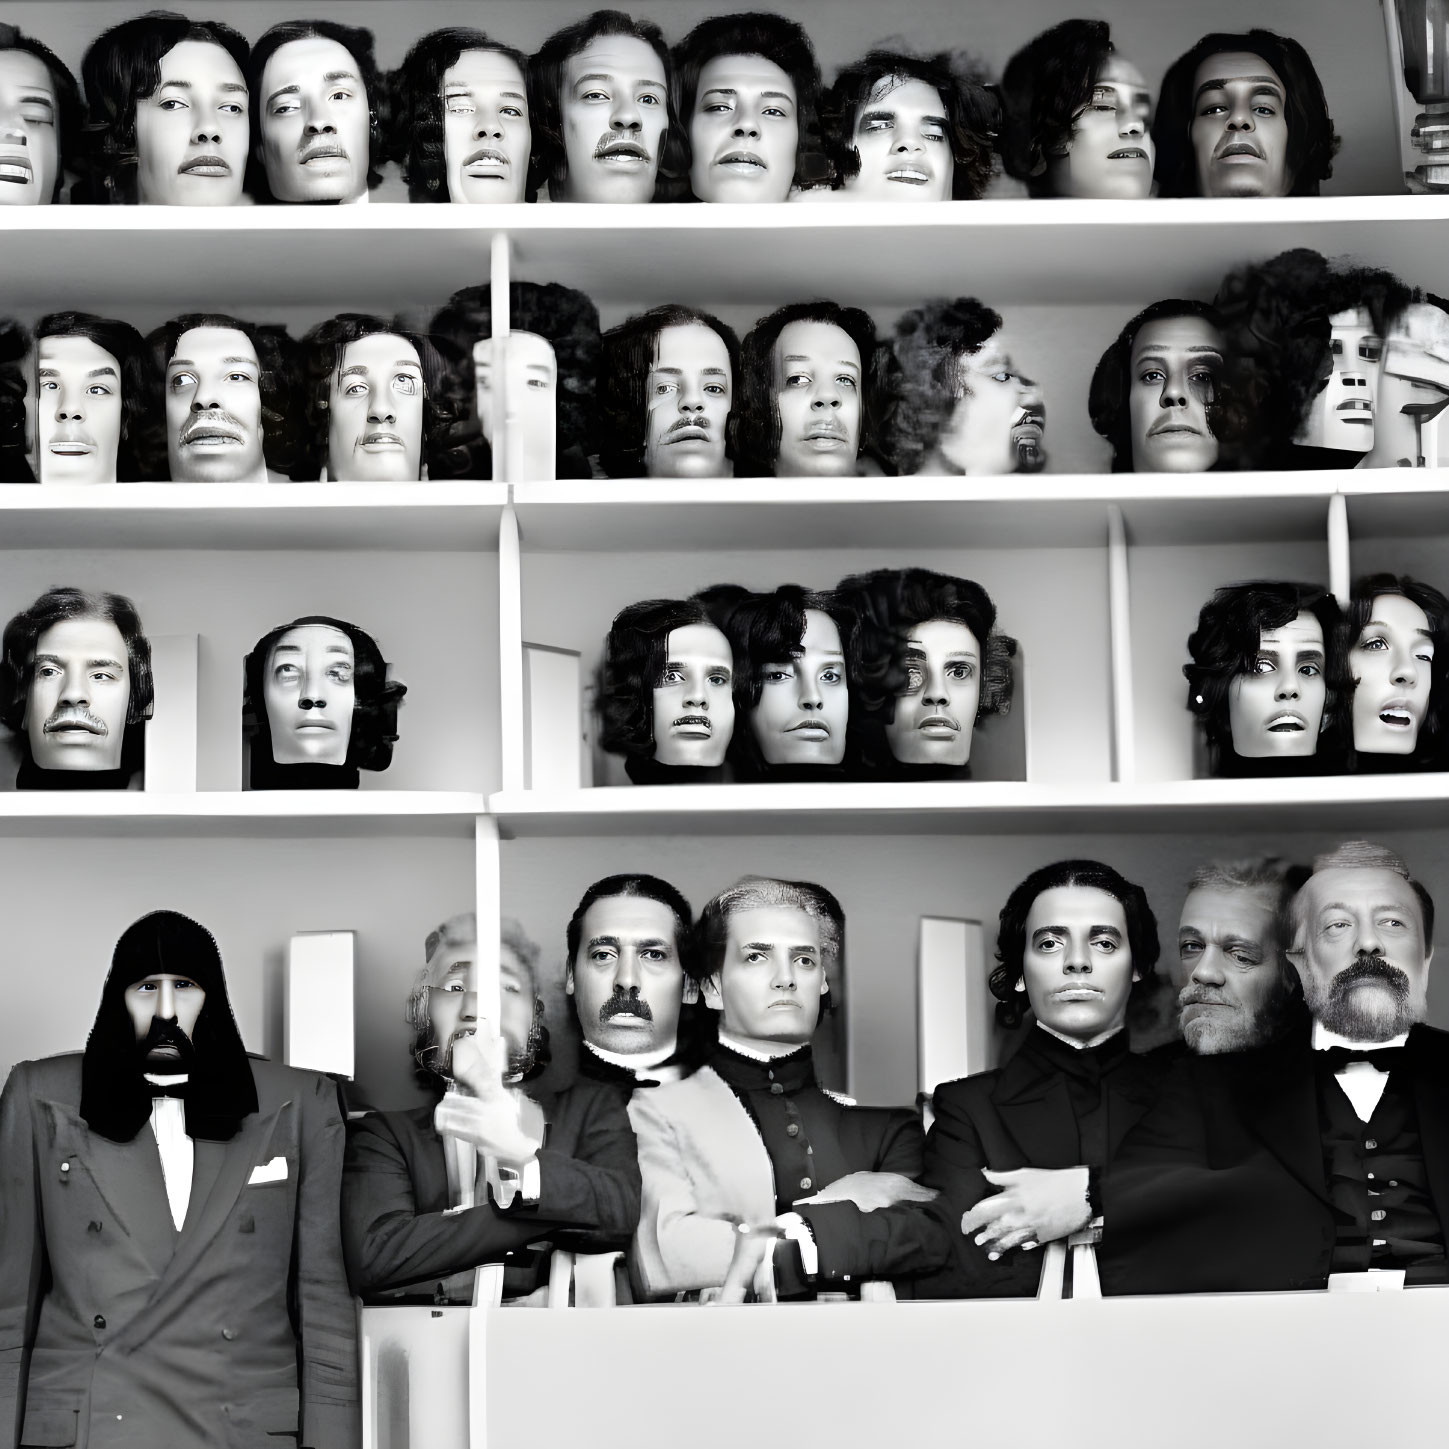 Assorted masks with diverse expressions above people mimicking them